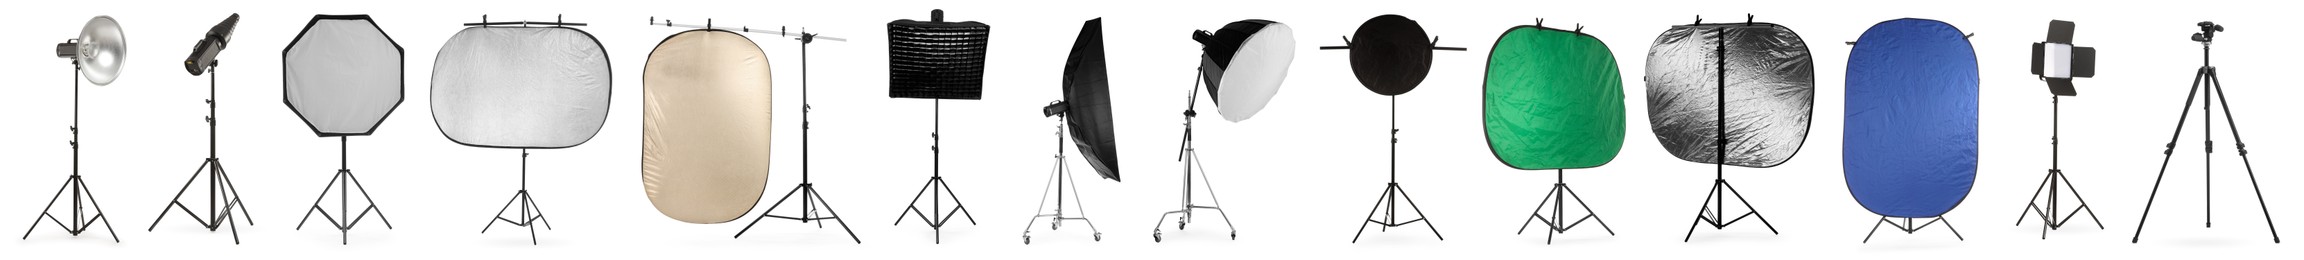 Image of Set of different professional photo studio equipment isolated on white